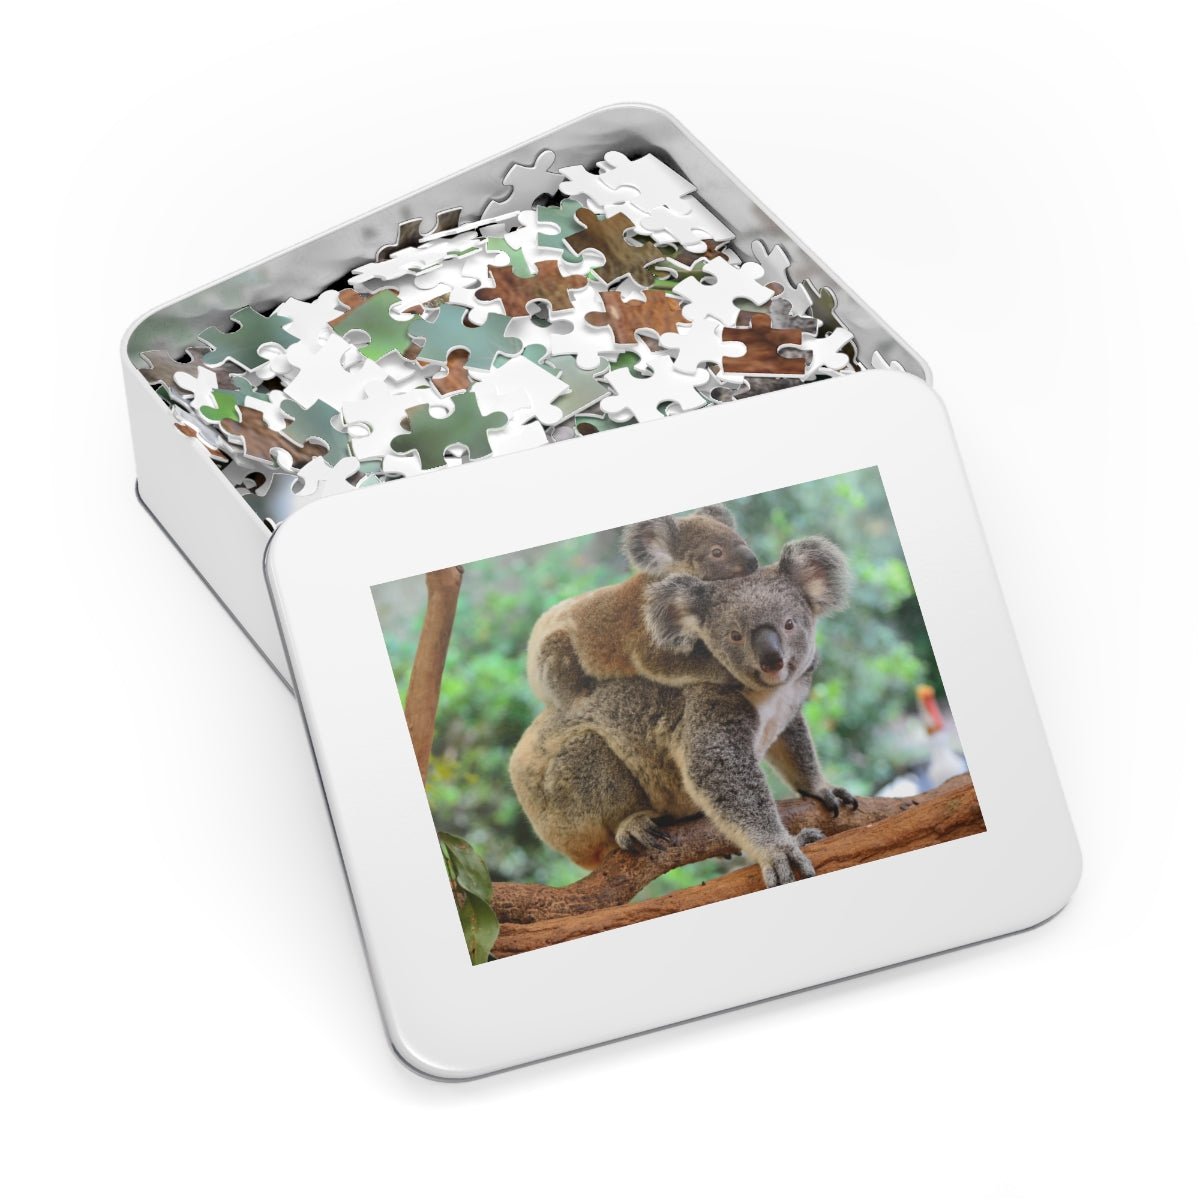 Mom and Baby Koala Bears Jigsaw Puzzle - Puffin Lime